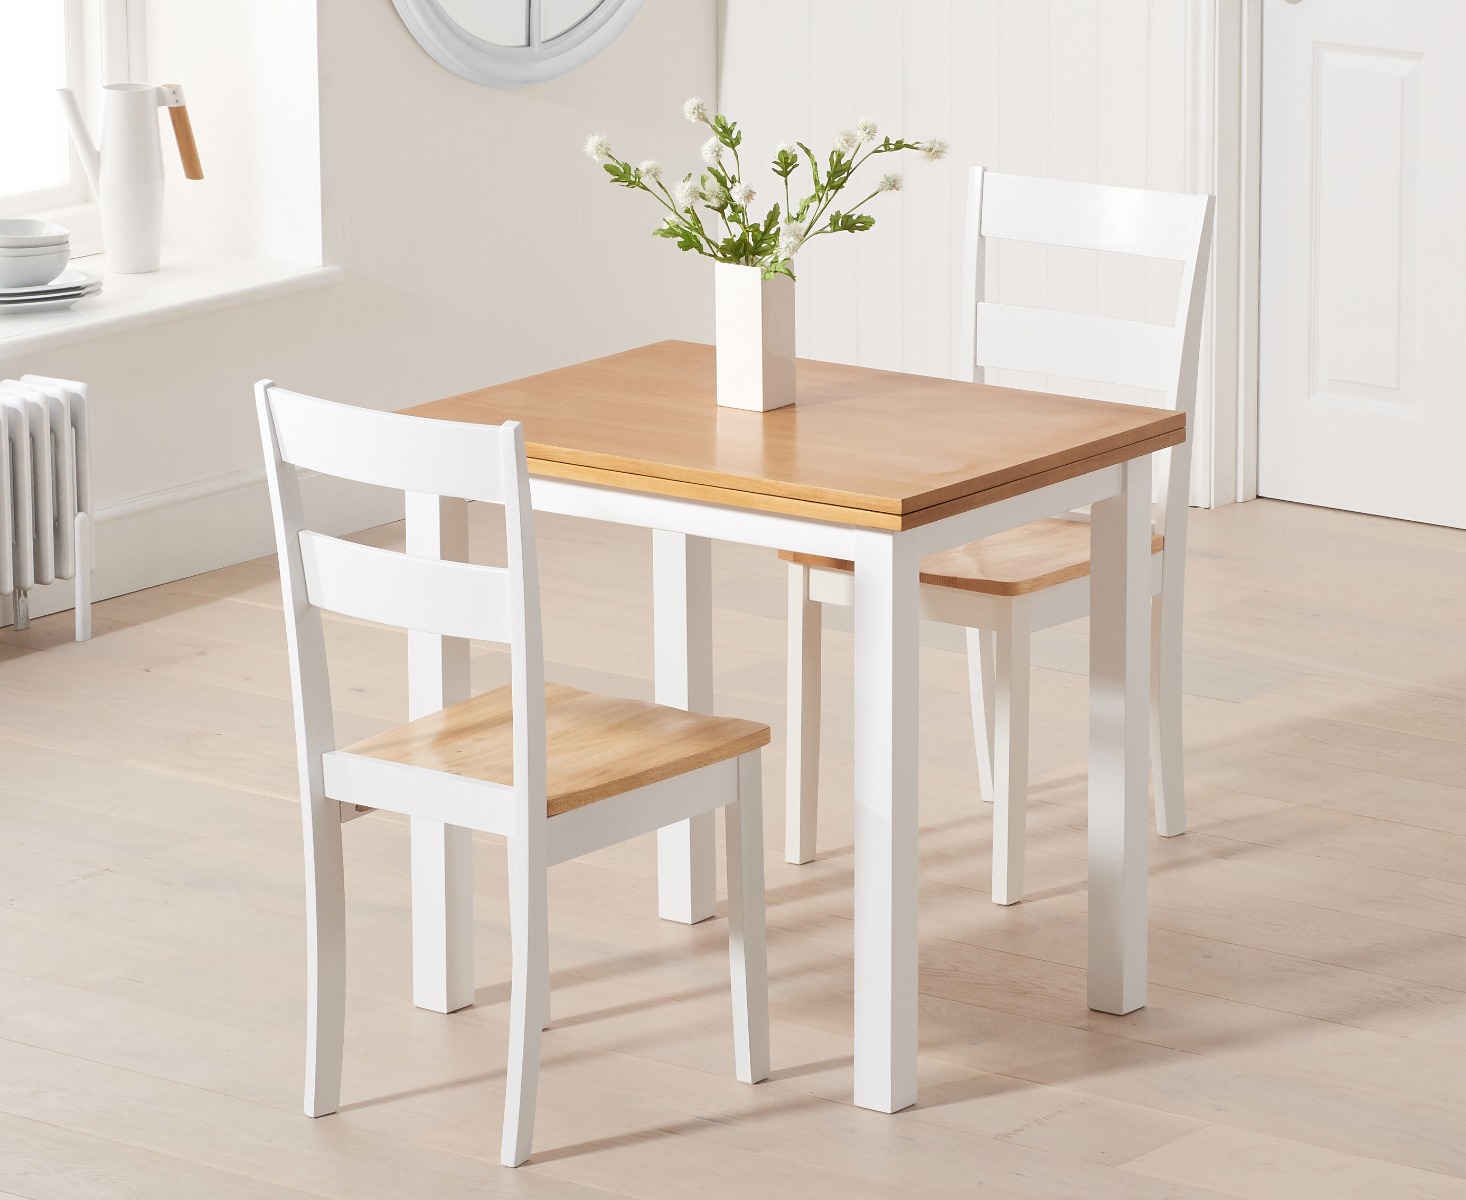 Hastings Extending White And Oak Painted Table With 4 Oak And White Chiltern Chairs